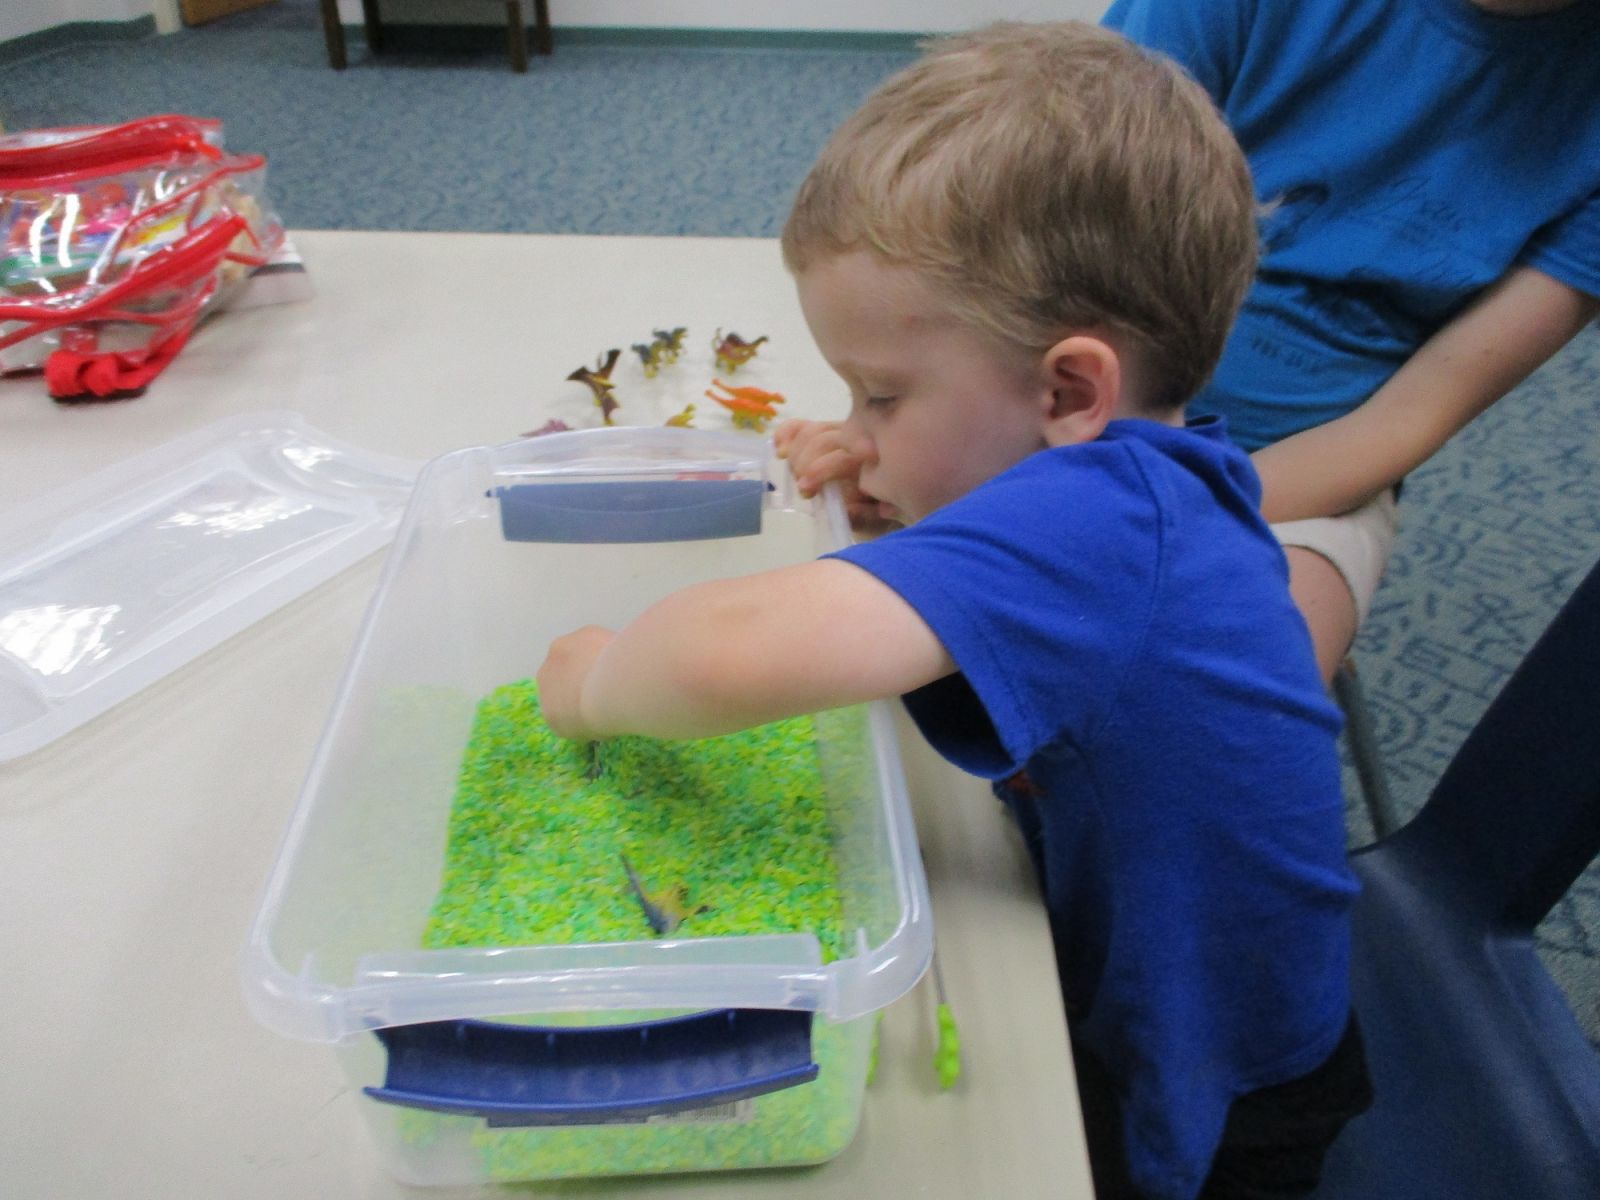 A boy digs for toys in a sensory bin of green rice.